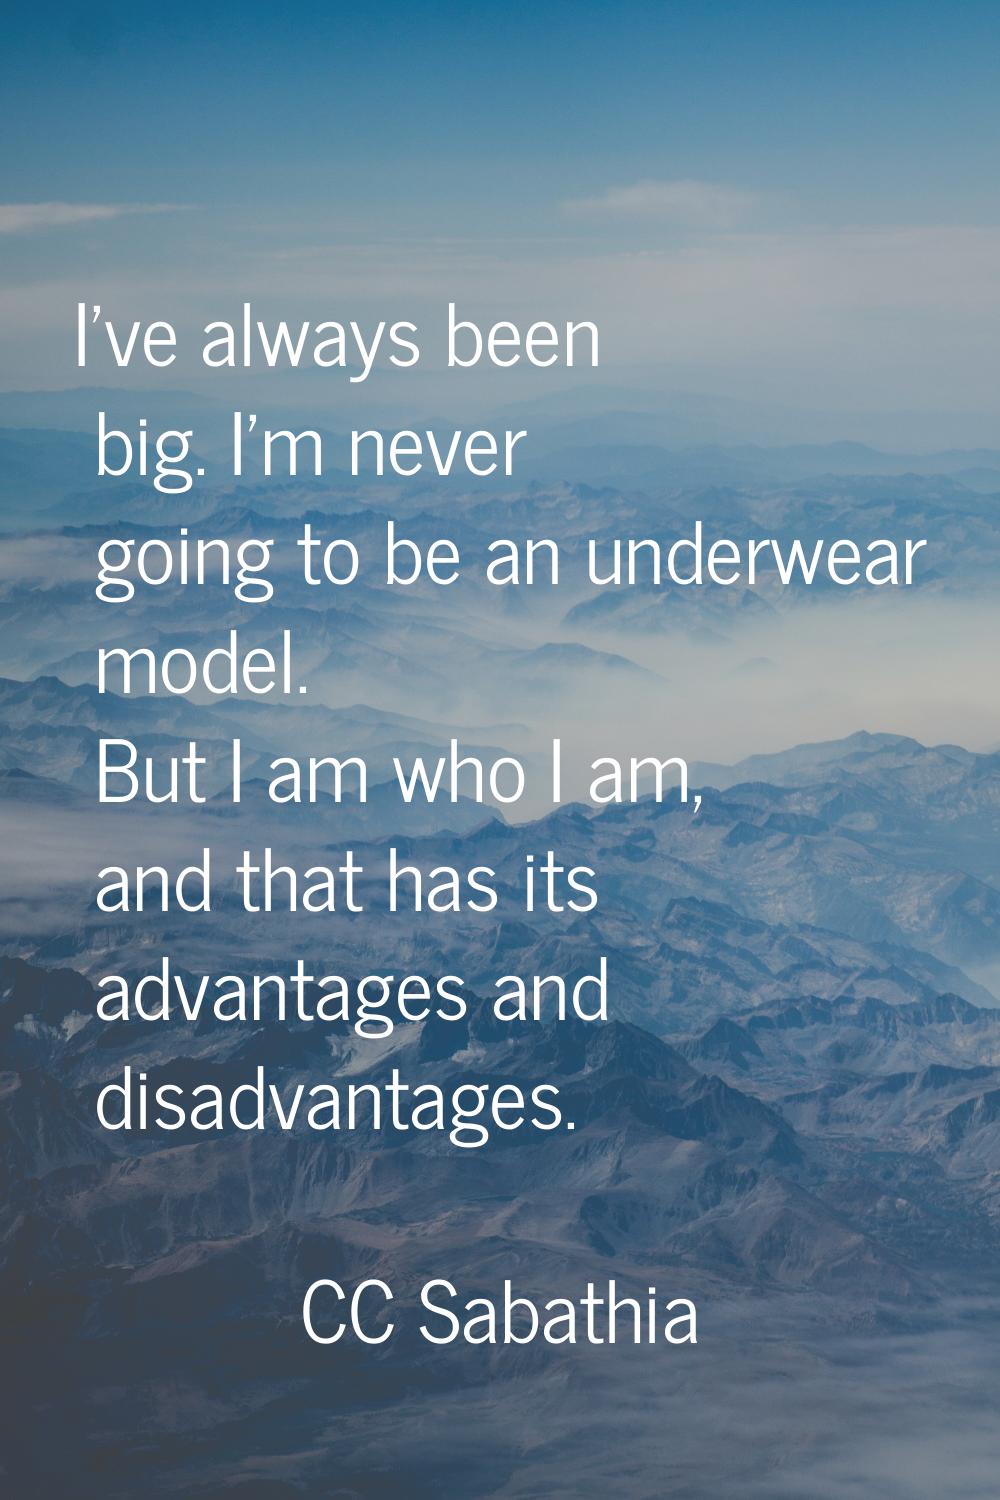 I've always been big. I'm never going to be an underwear model. But I am who I am, and that has its